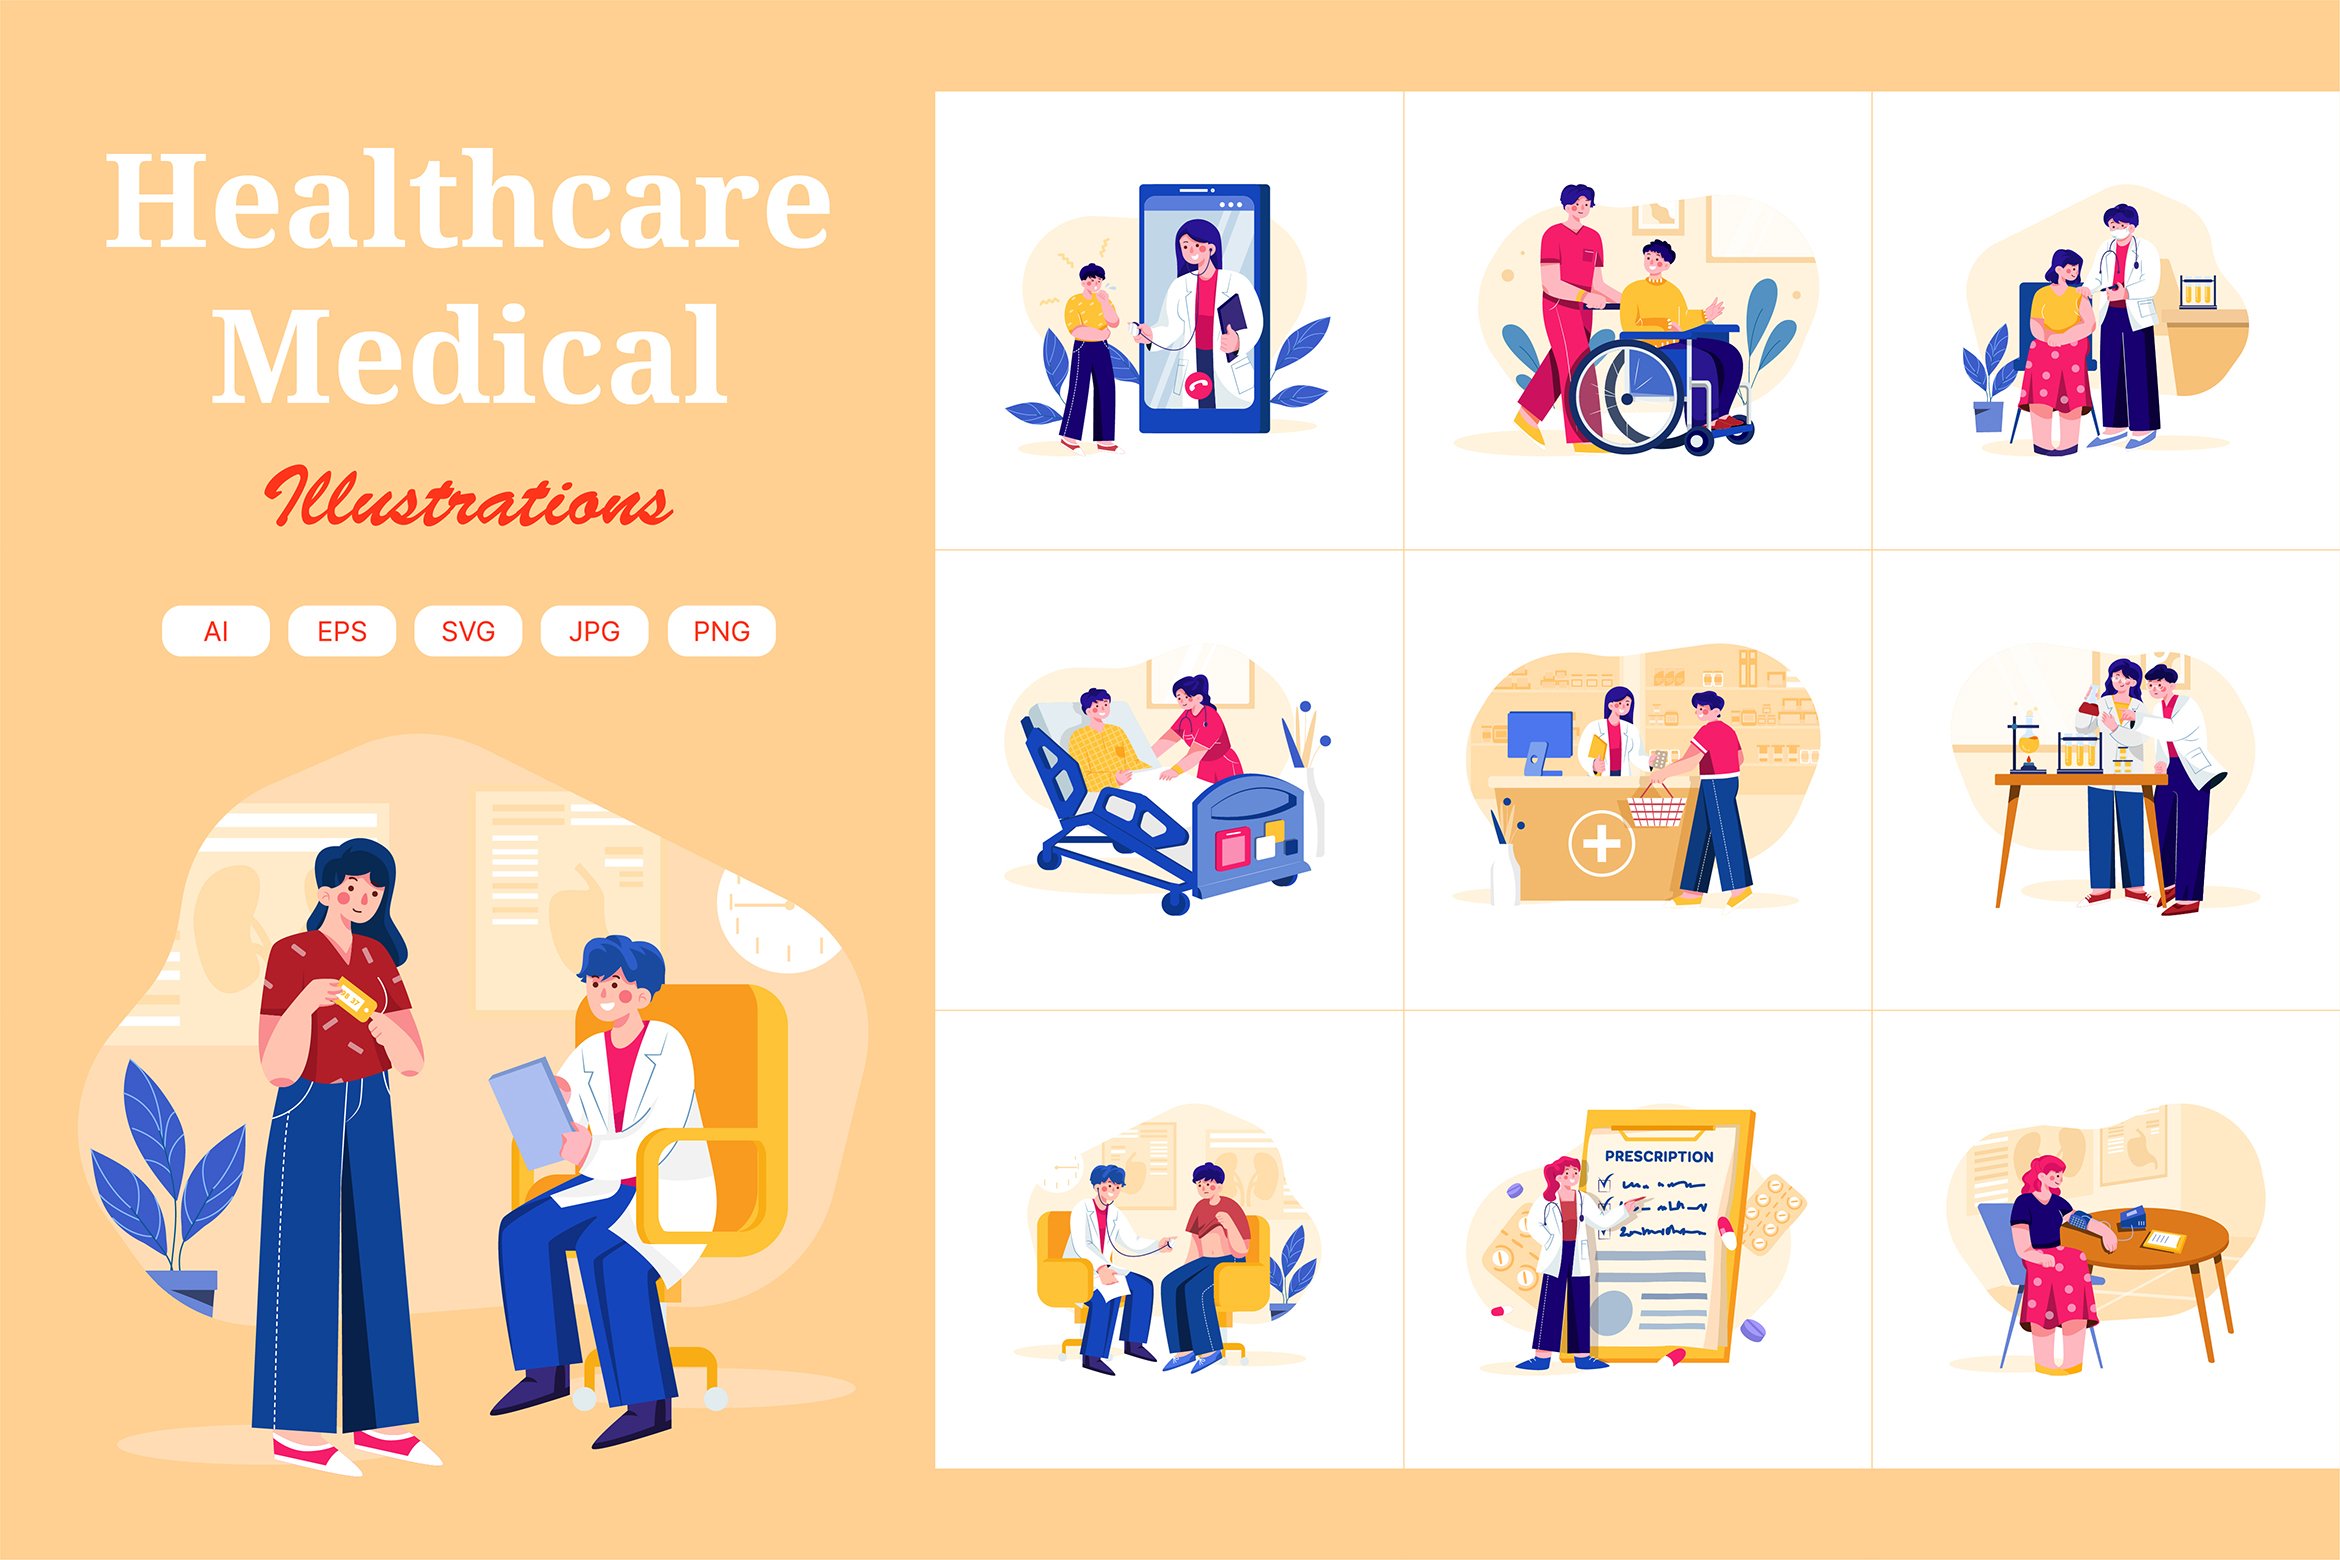 M365_ Healthcare Illustration Pack cover image.